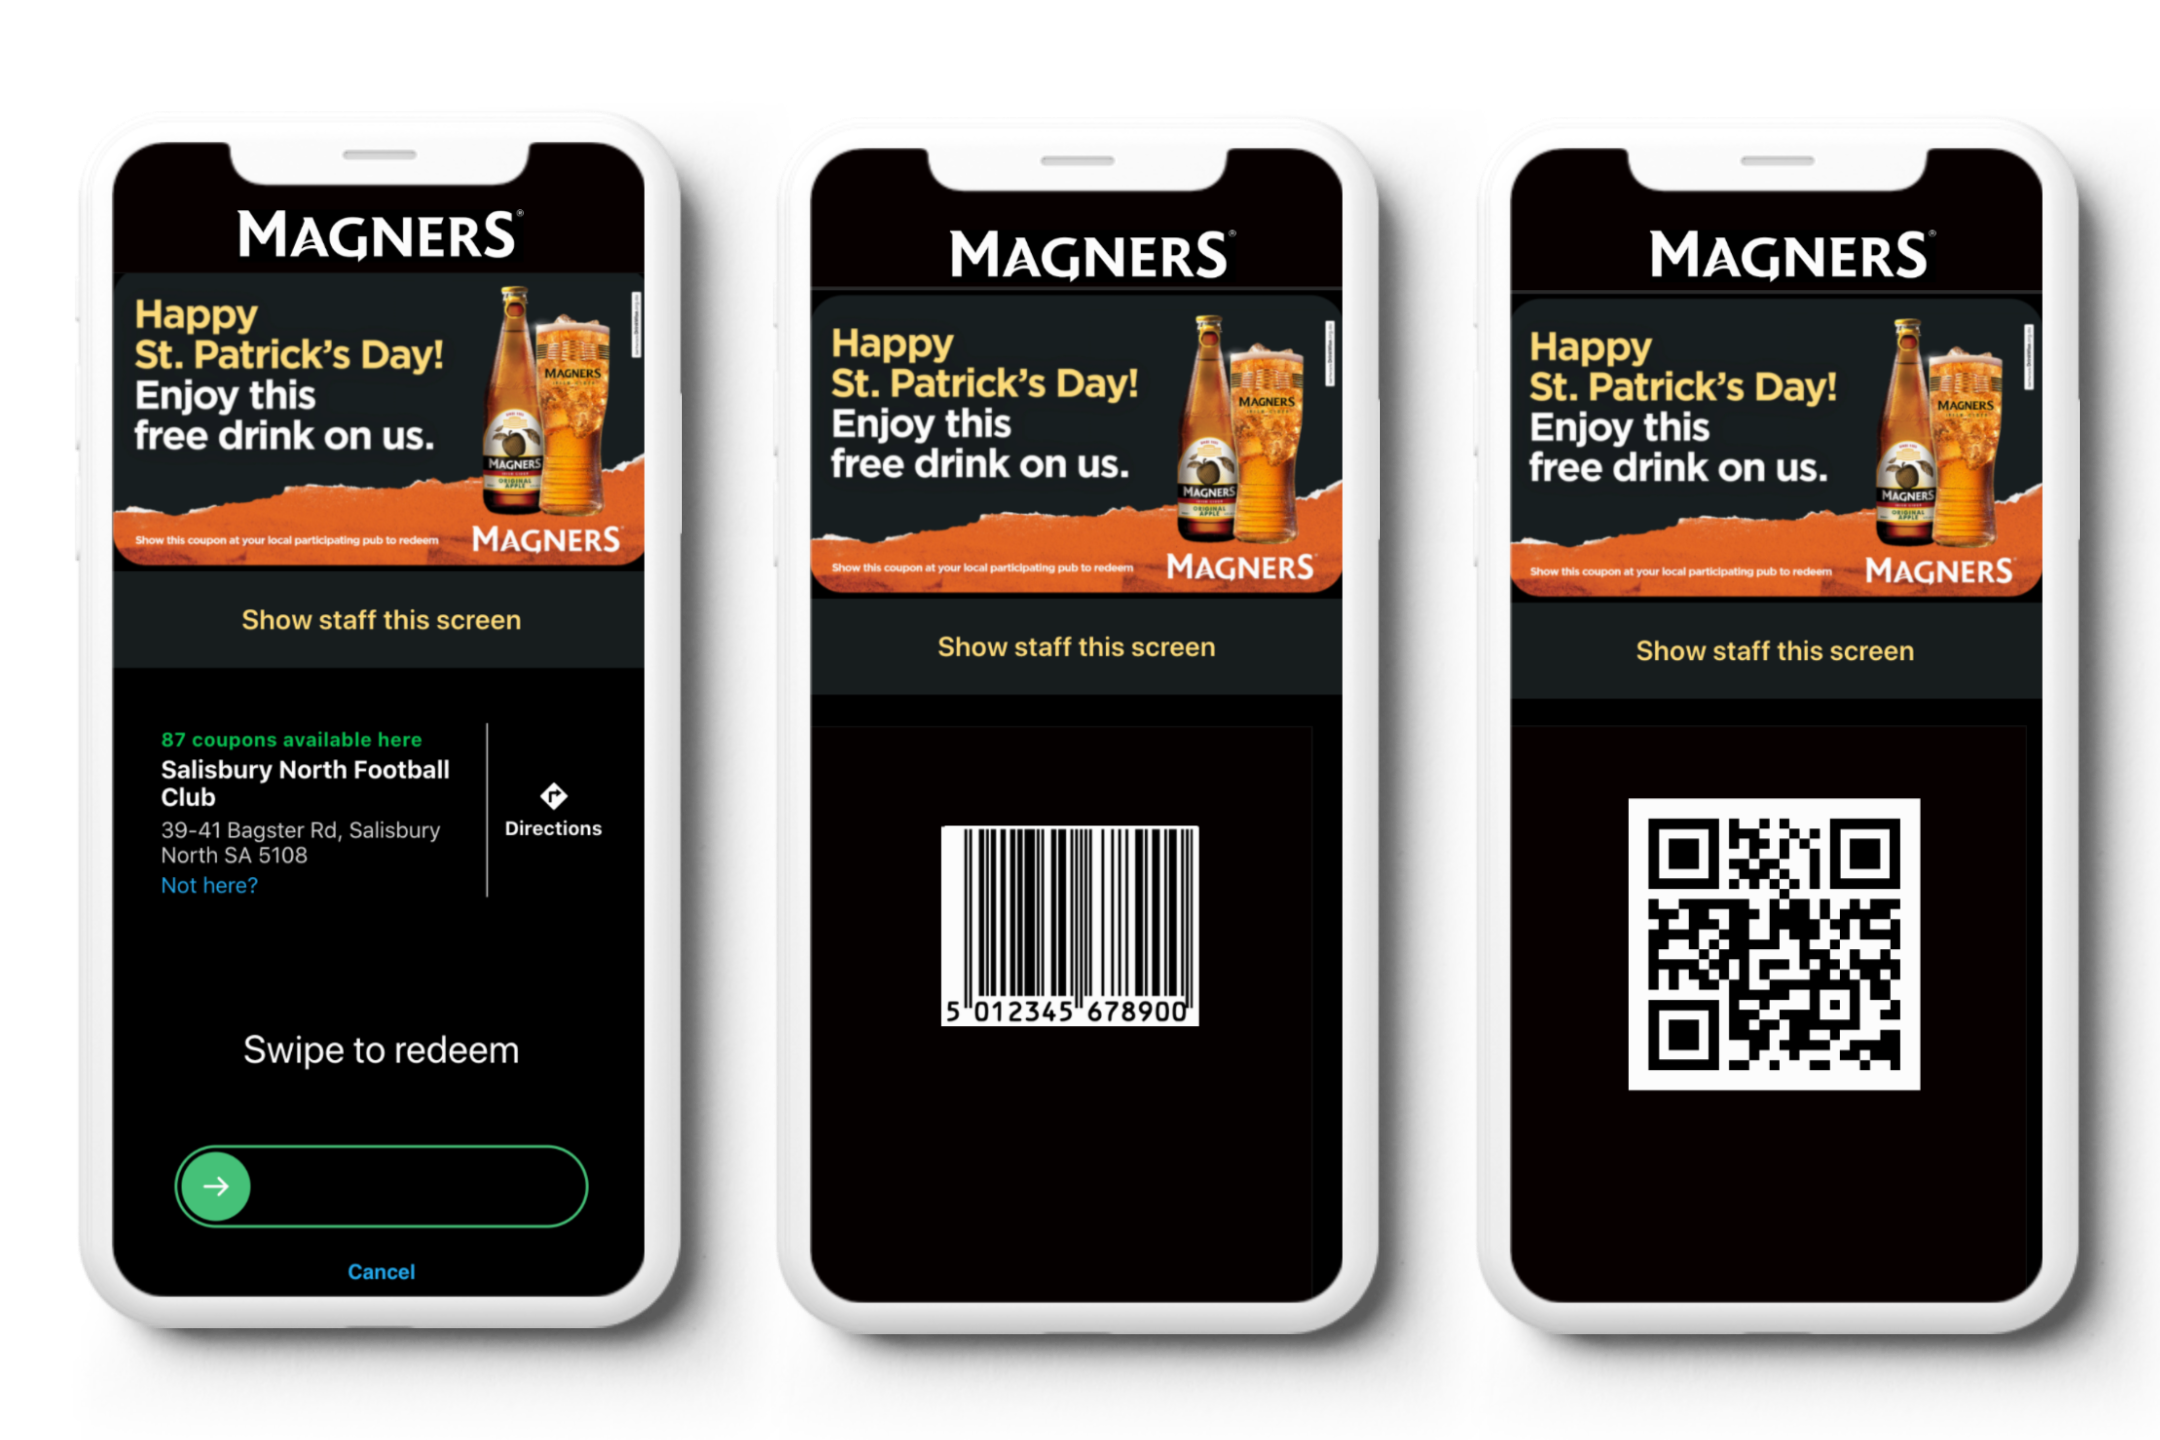 Magners digital coupon redeemption